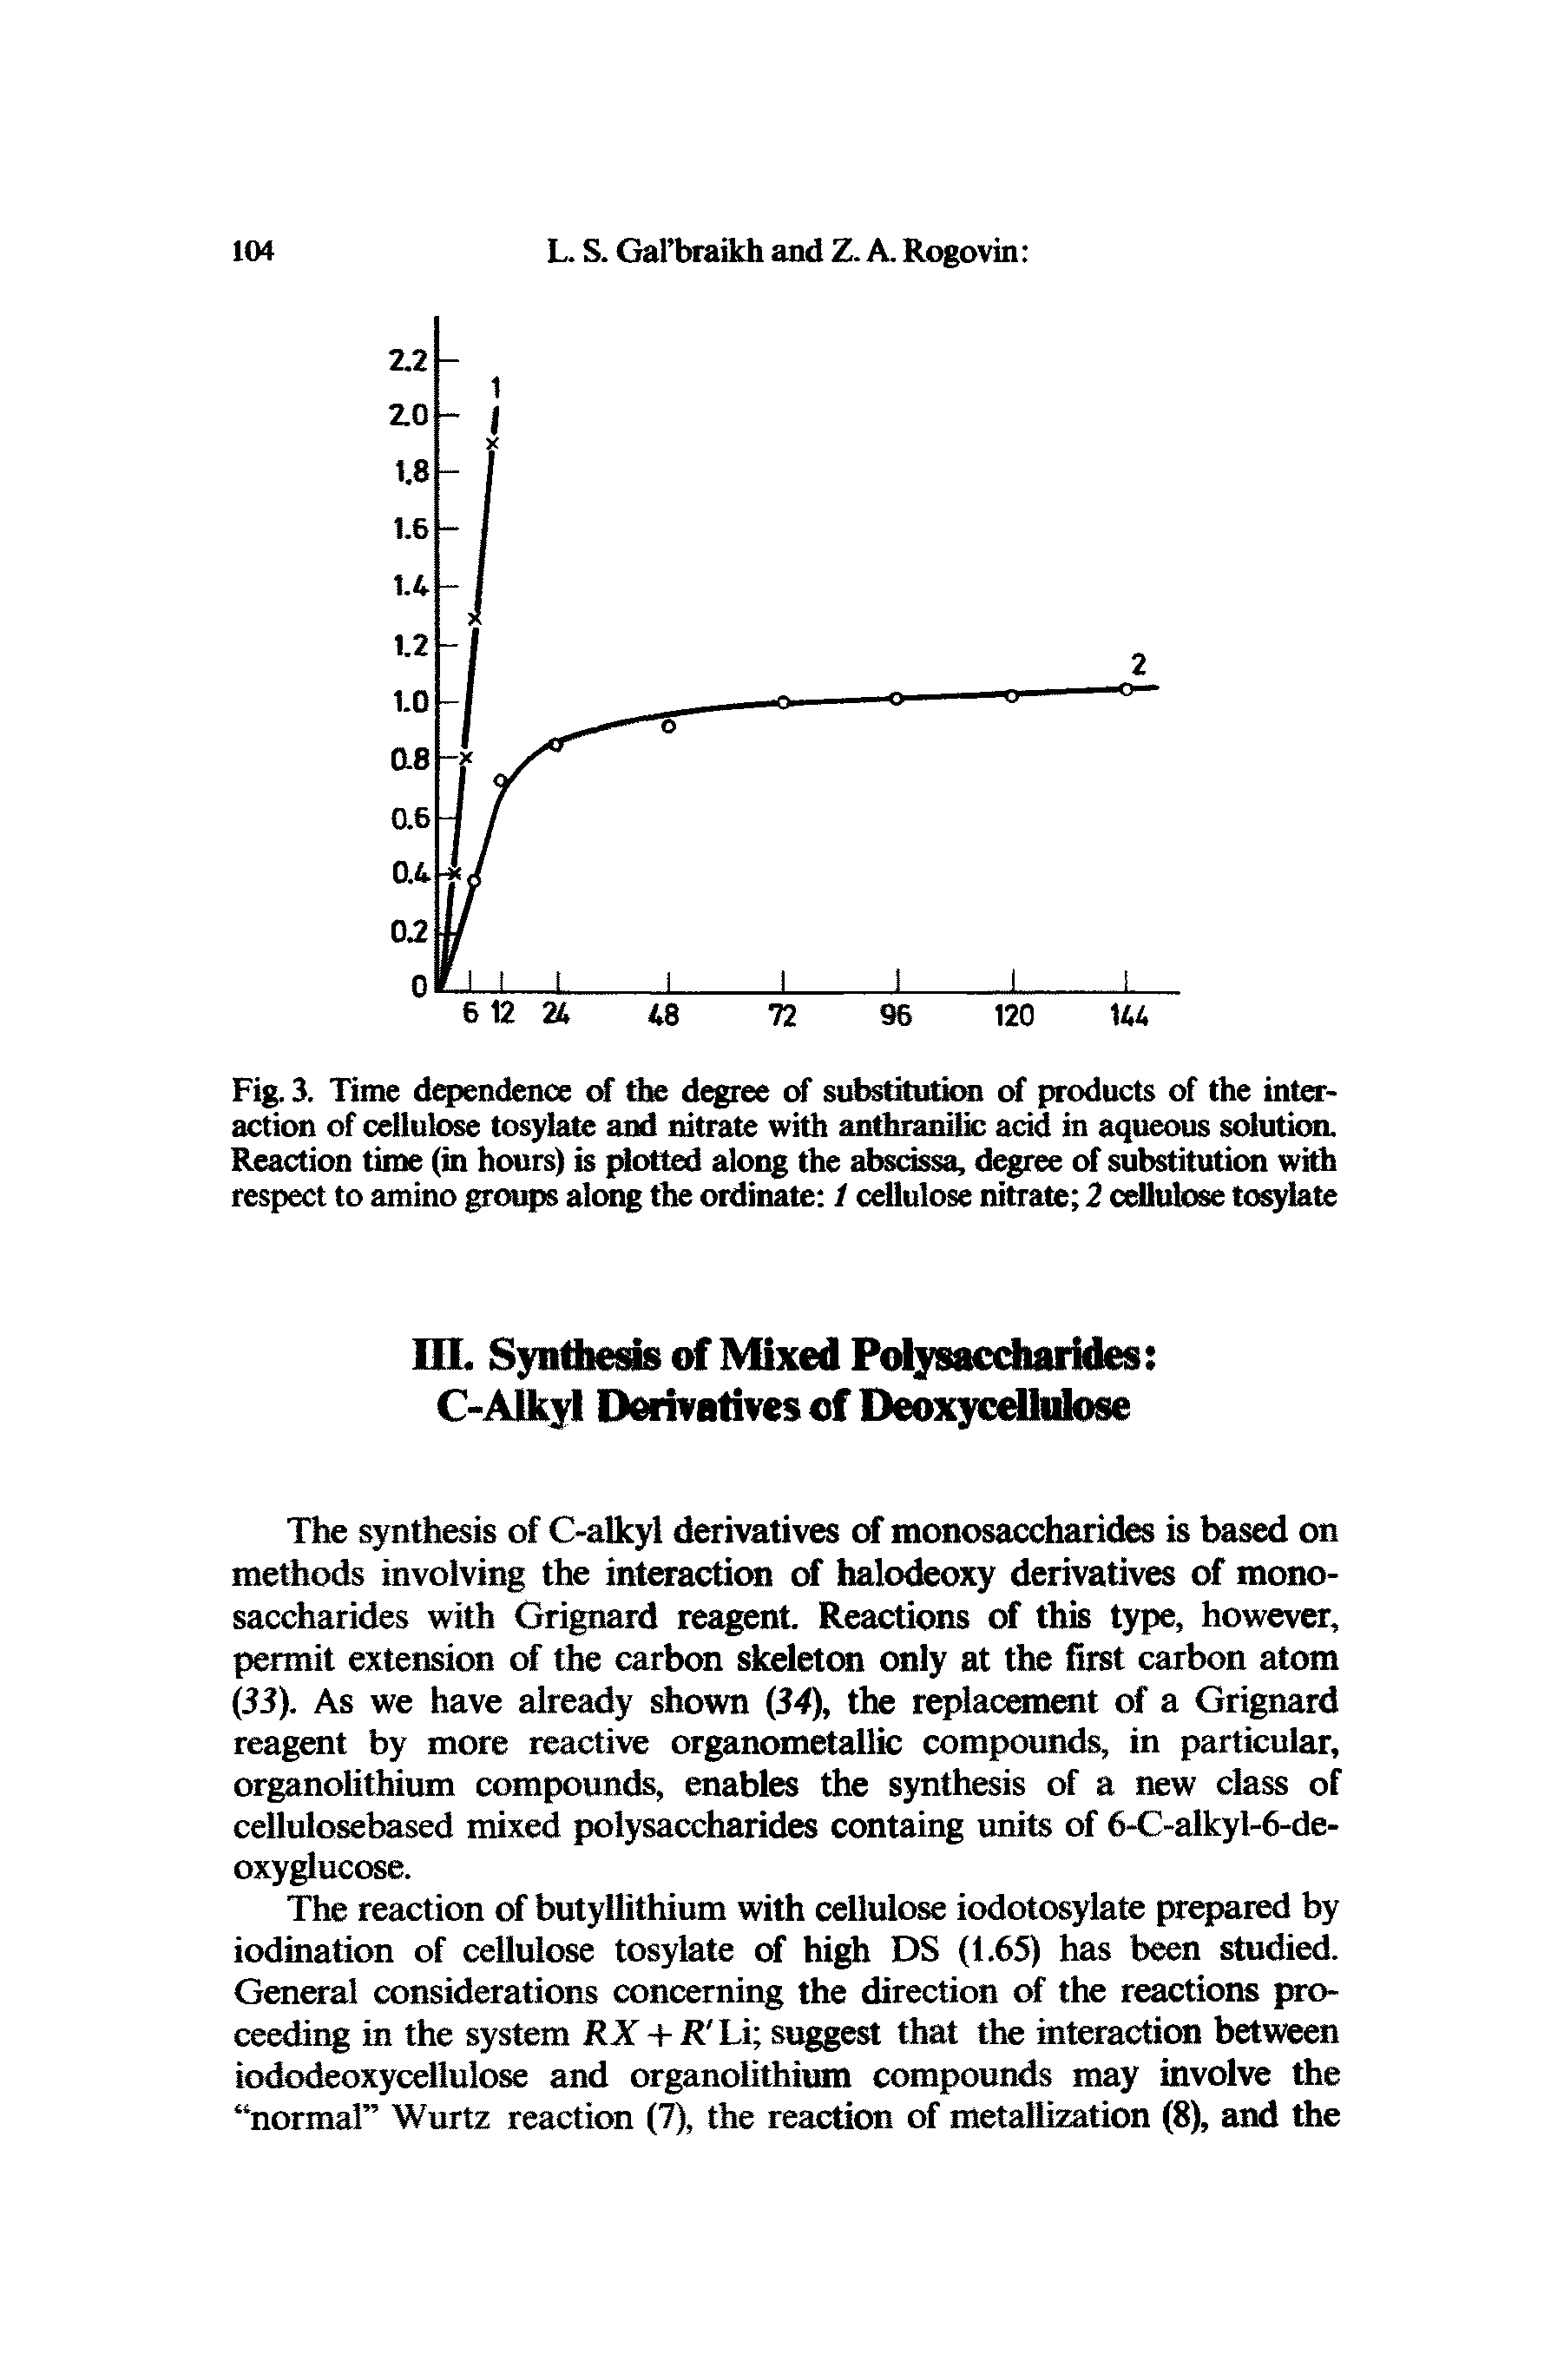 Fig. 3. Time dependence of the degree of substitution of products of the interaction of cellulose tosylate and nitrate with anthranilic acid in aqueous solution. Reaction time (in hours) is dotted along the abscissa, degree of substitution with respect to amino groups along the ordinate 1 cellulose nitrate 2 cellulose tosylate...